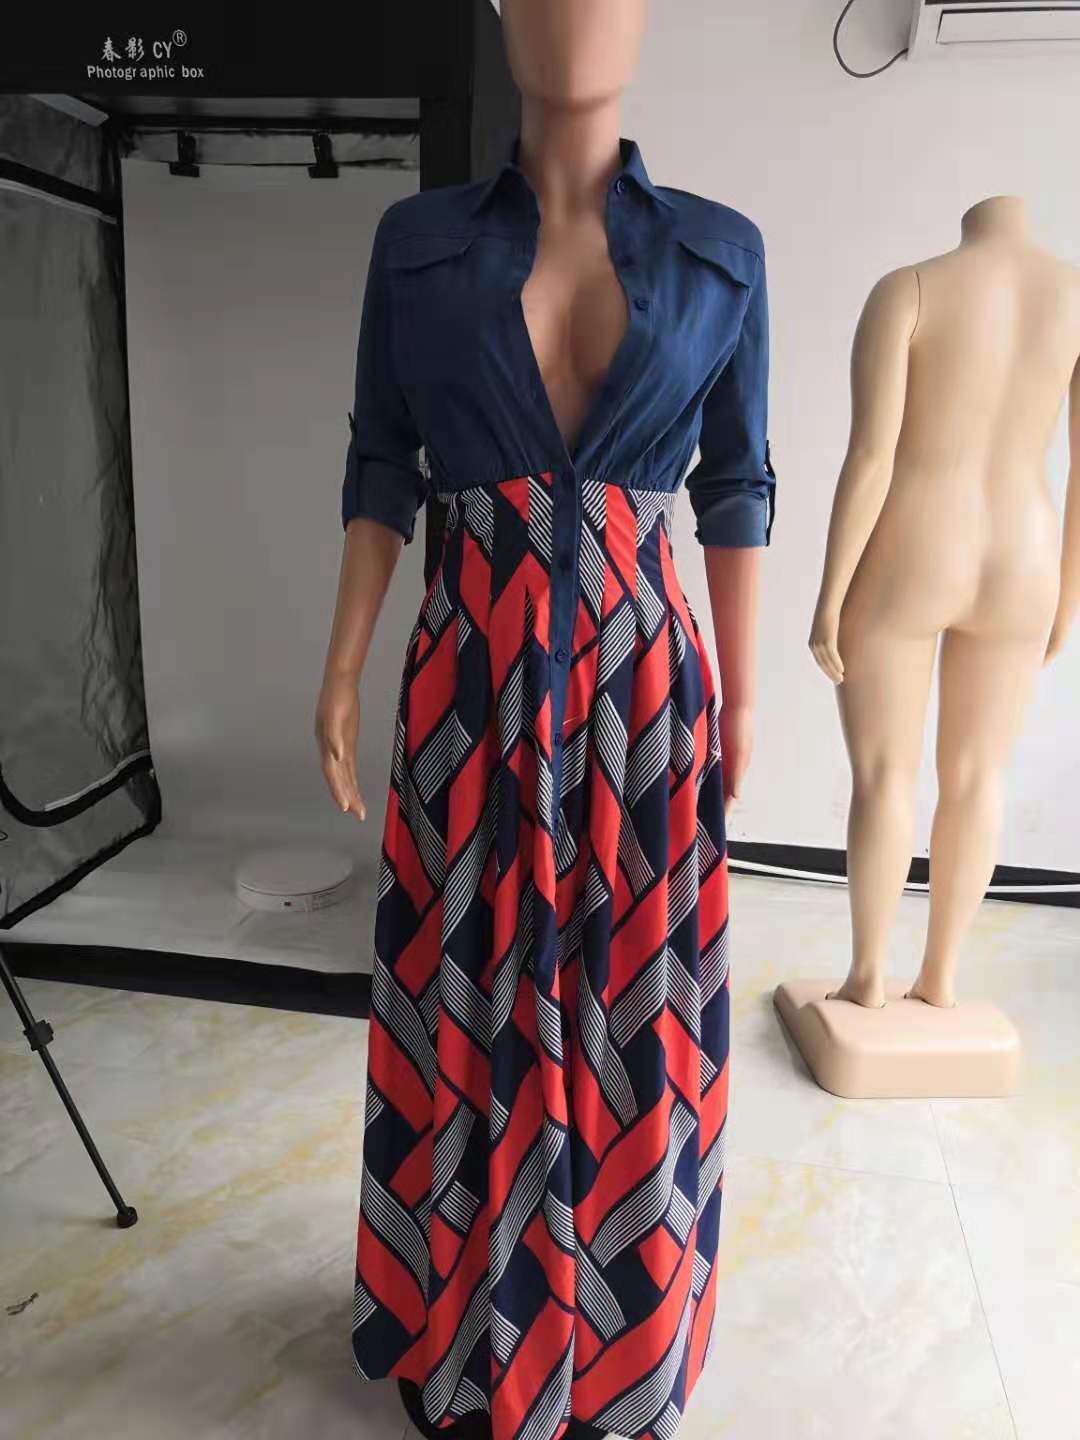 African Dresses for Women Spring Fashion African Women Printing Long Dress African Clothes